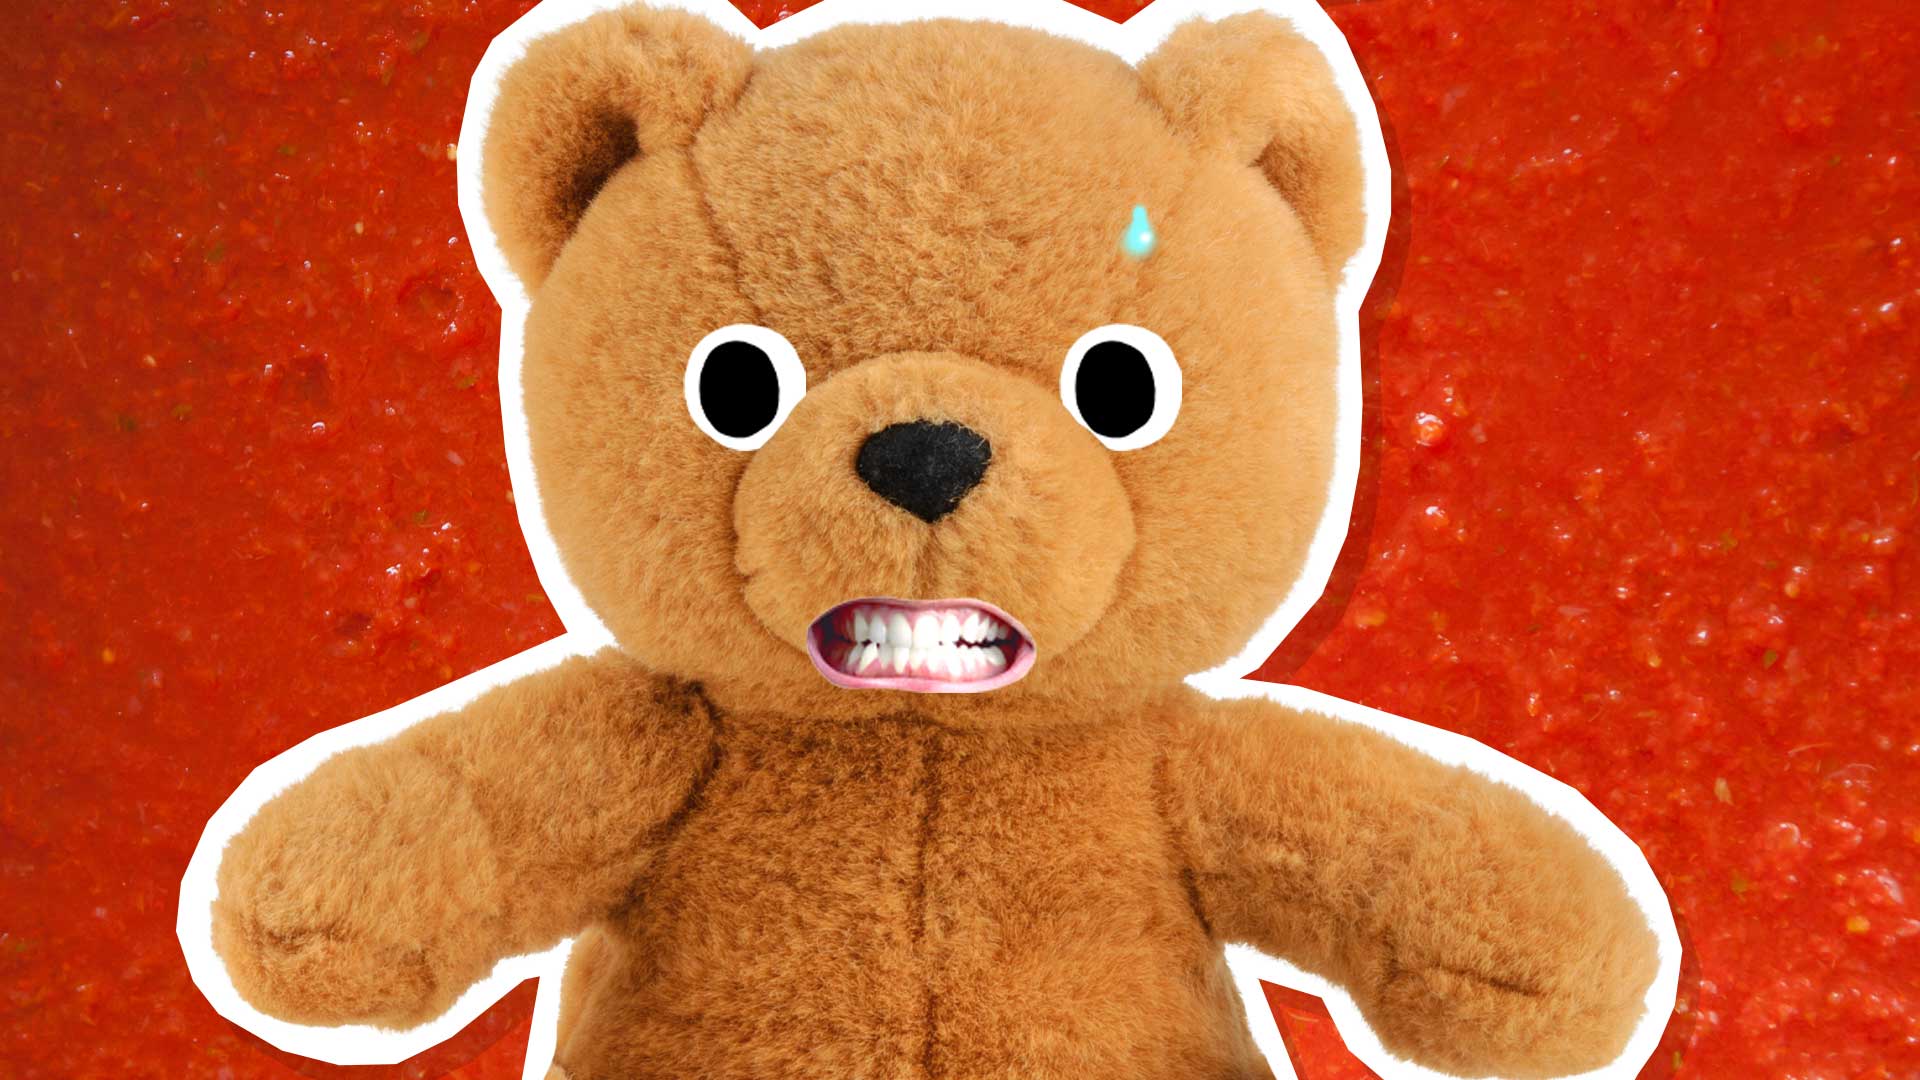 A teddy bear with a background of hot sauce!